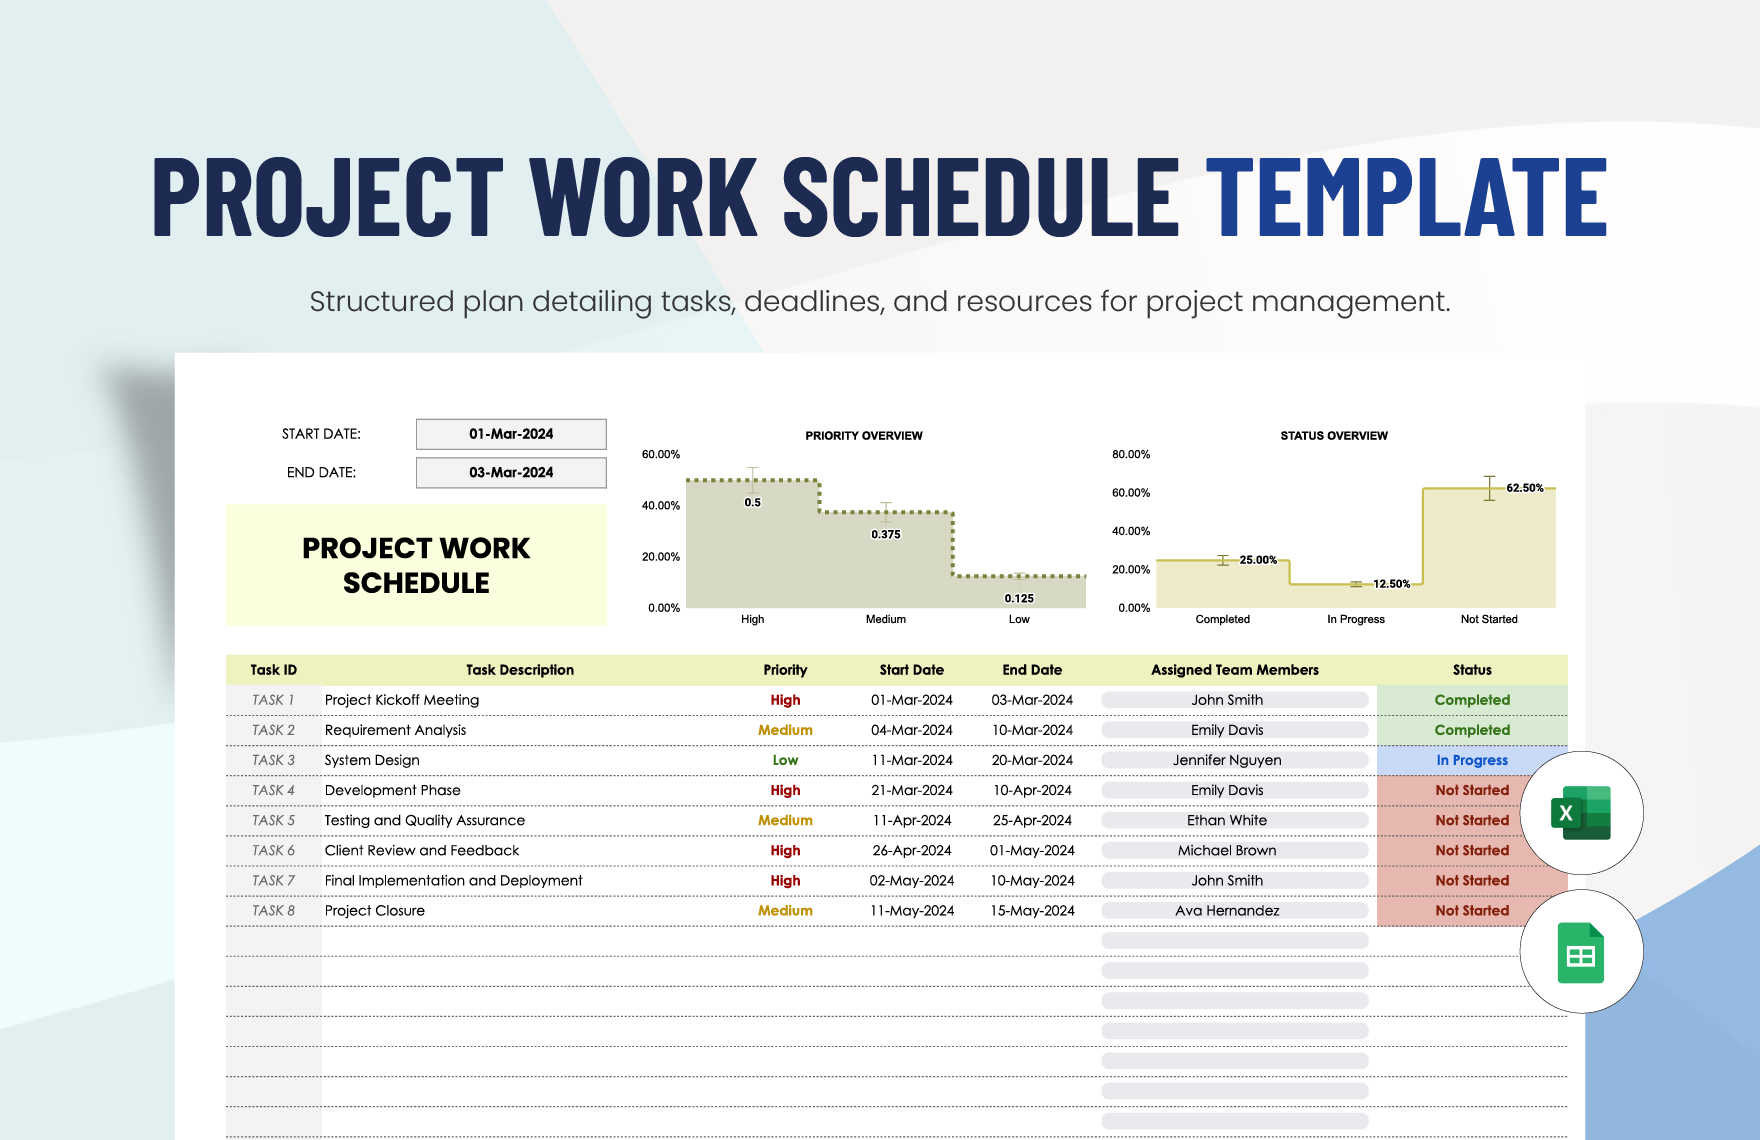 Project Work Schedule Template in Excel, Google Sheets